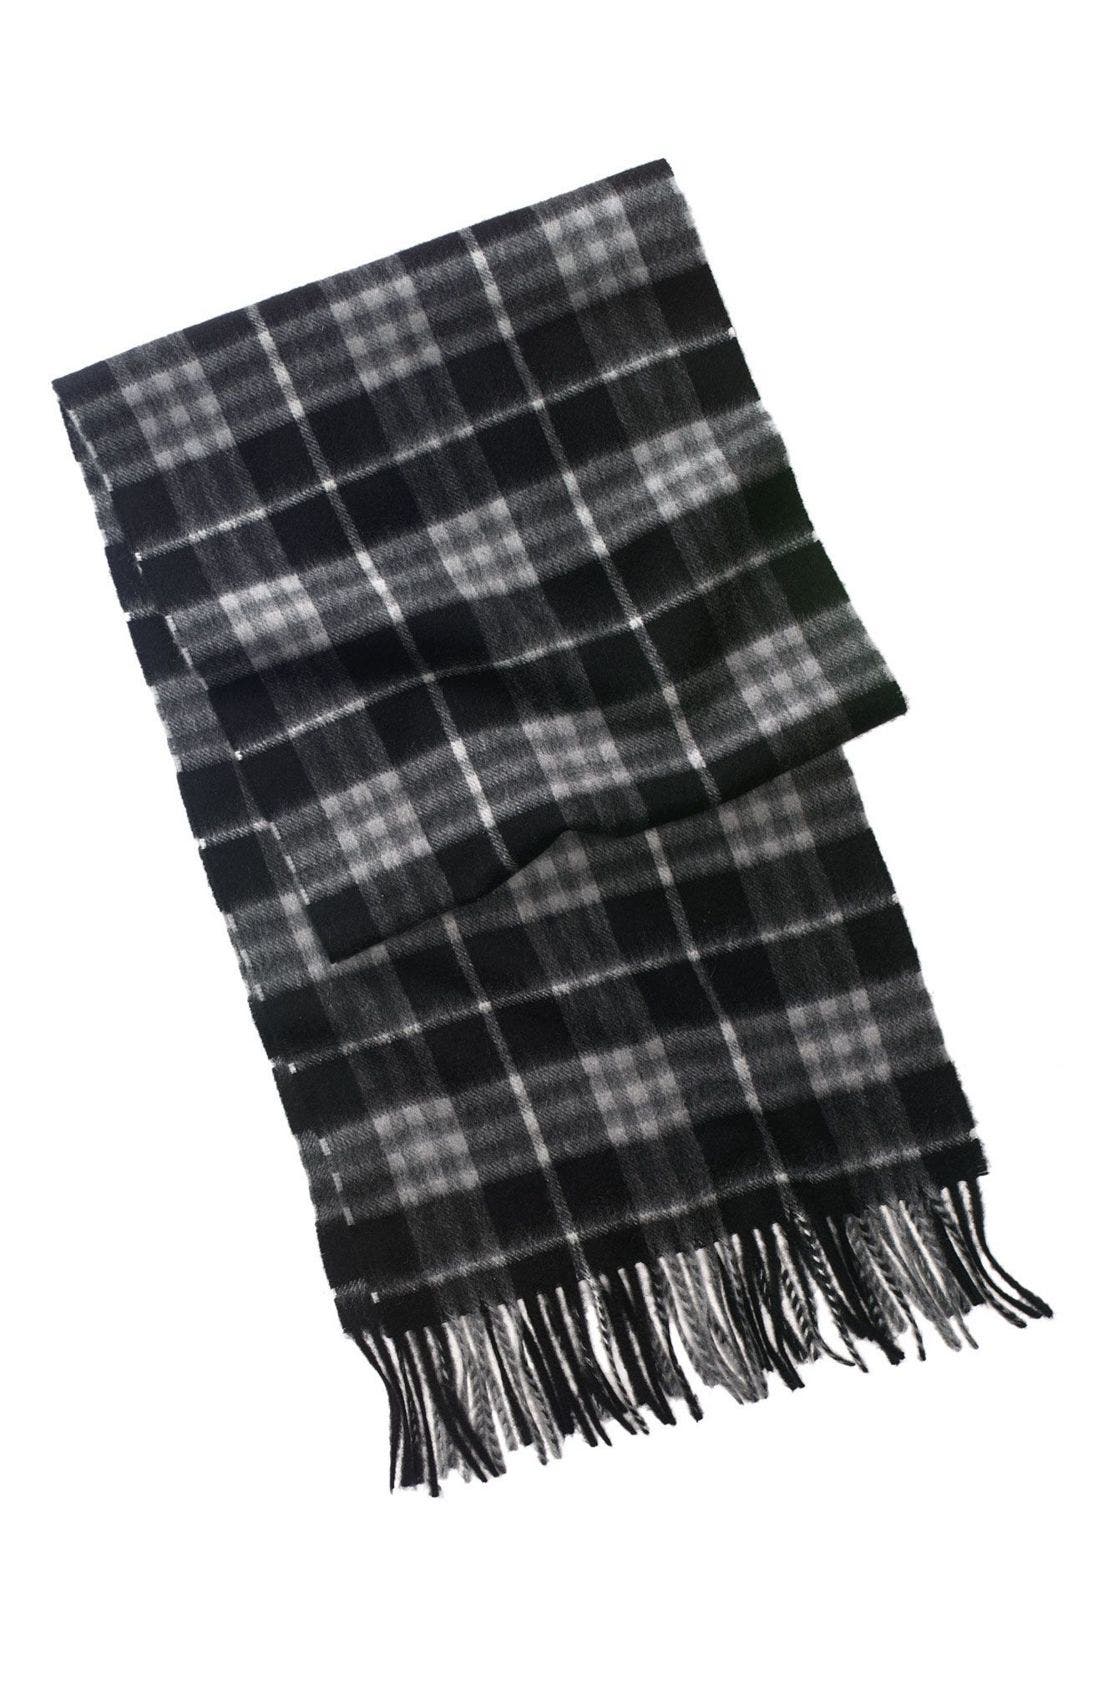 burberry cashmere scarf nordstrom